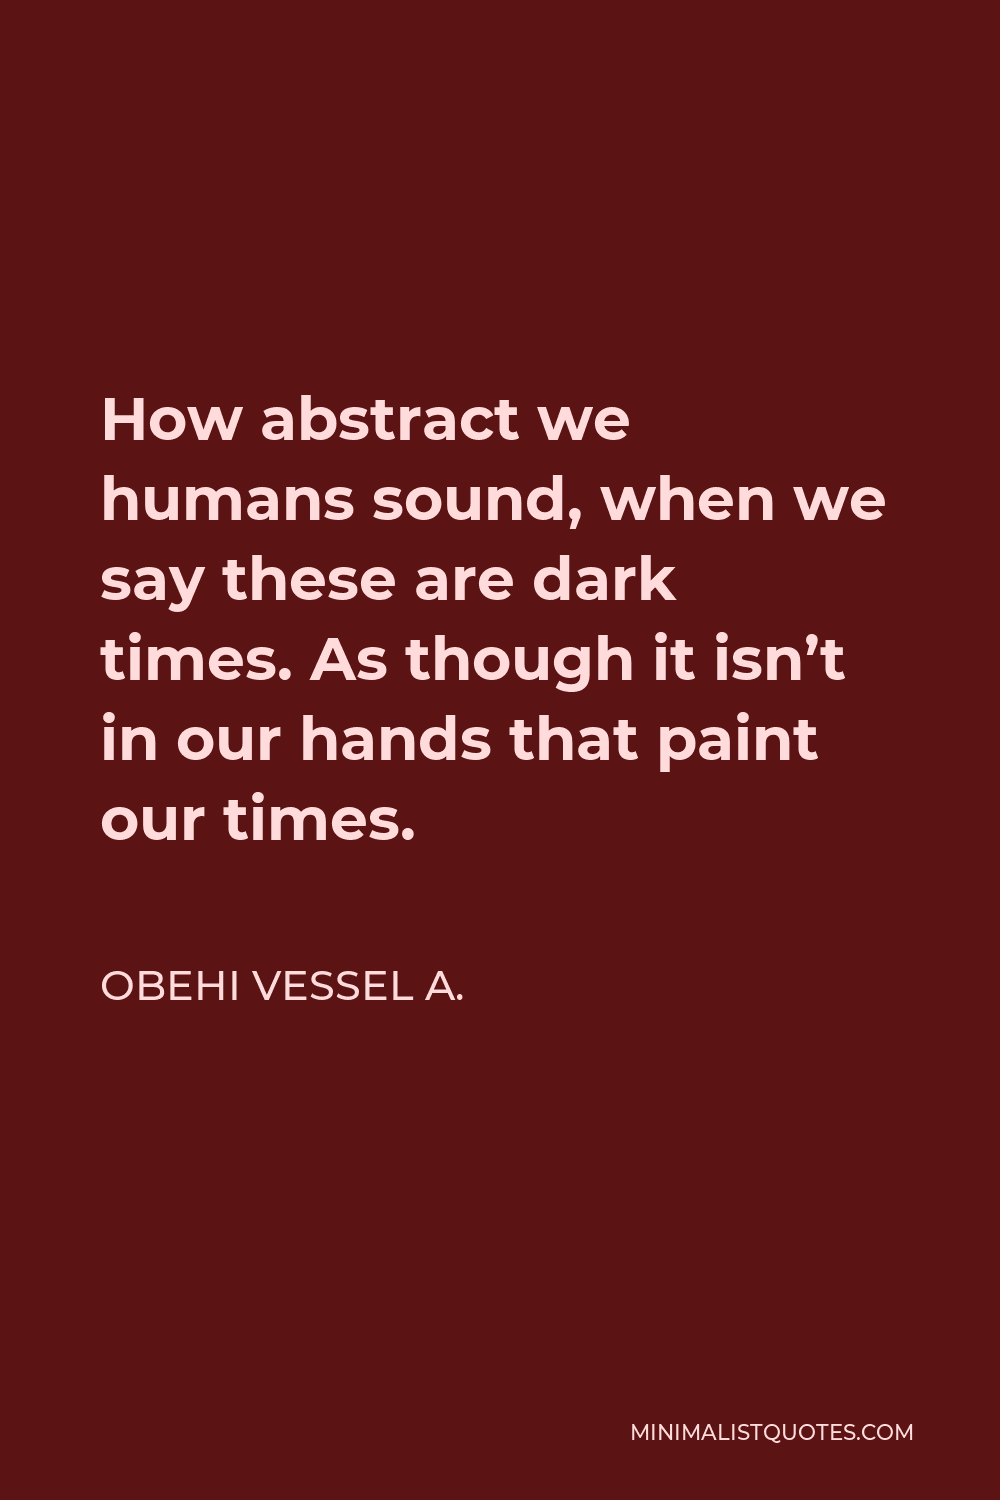 Obehi Vessel A. Quote - How abstract we humans sound, when we say these are dark times. As though it isn’t in our hands that paint our times.